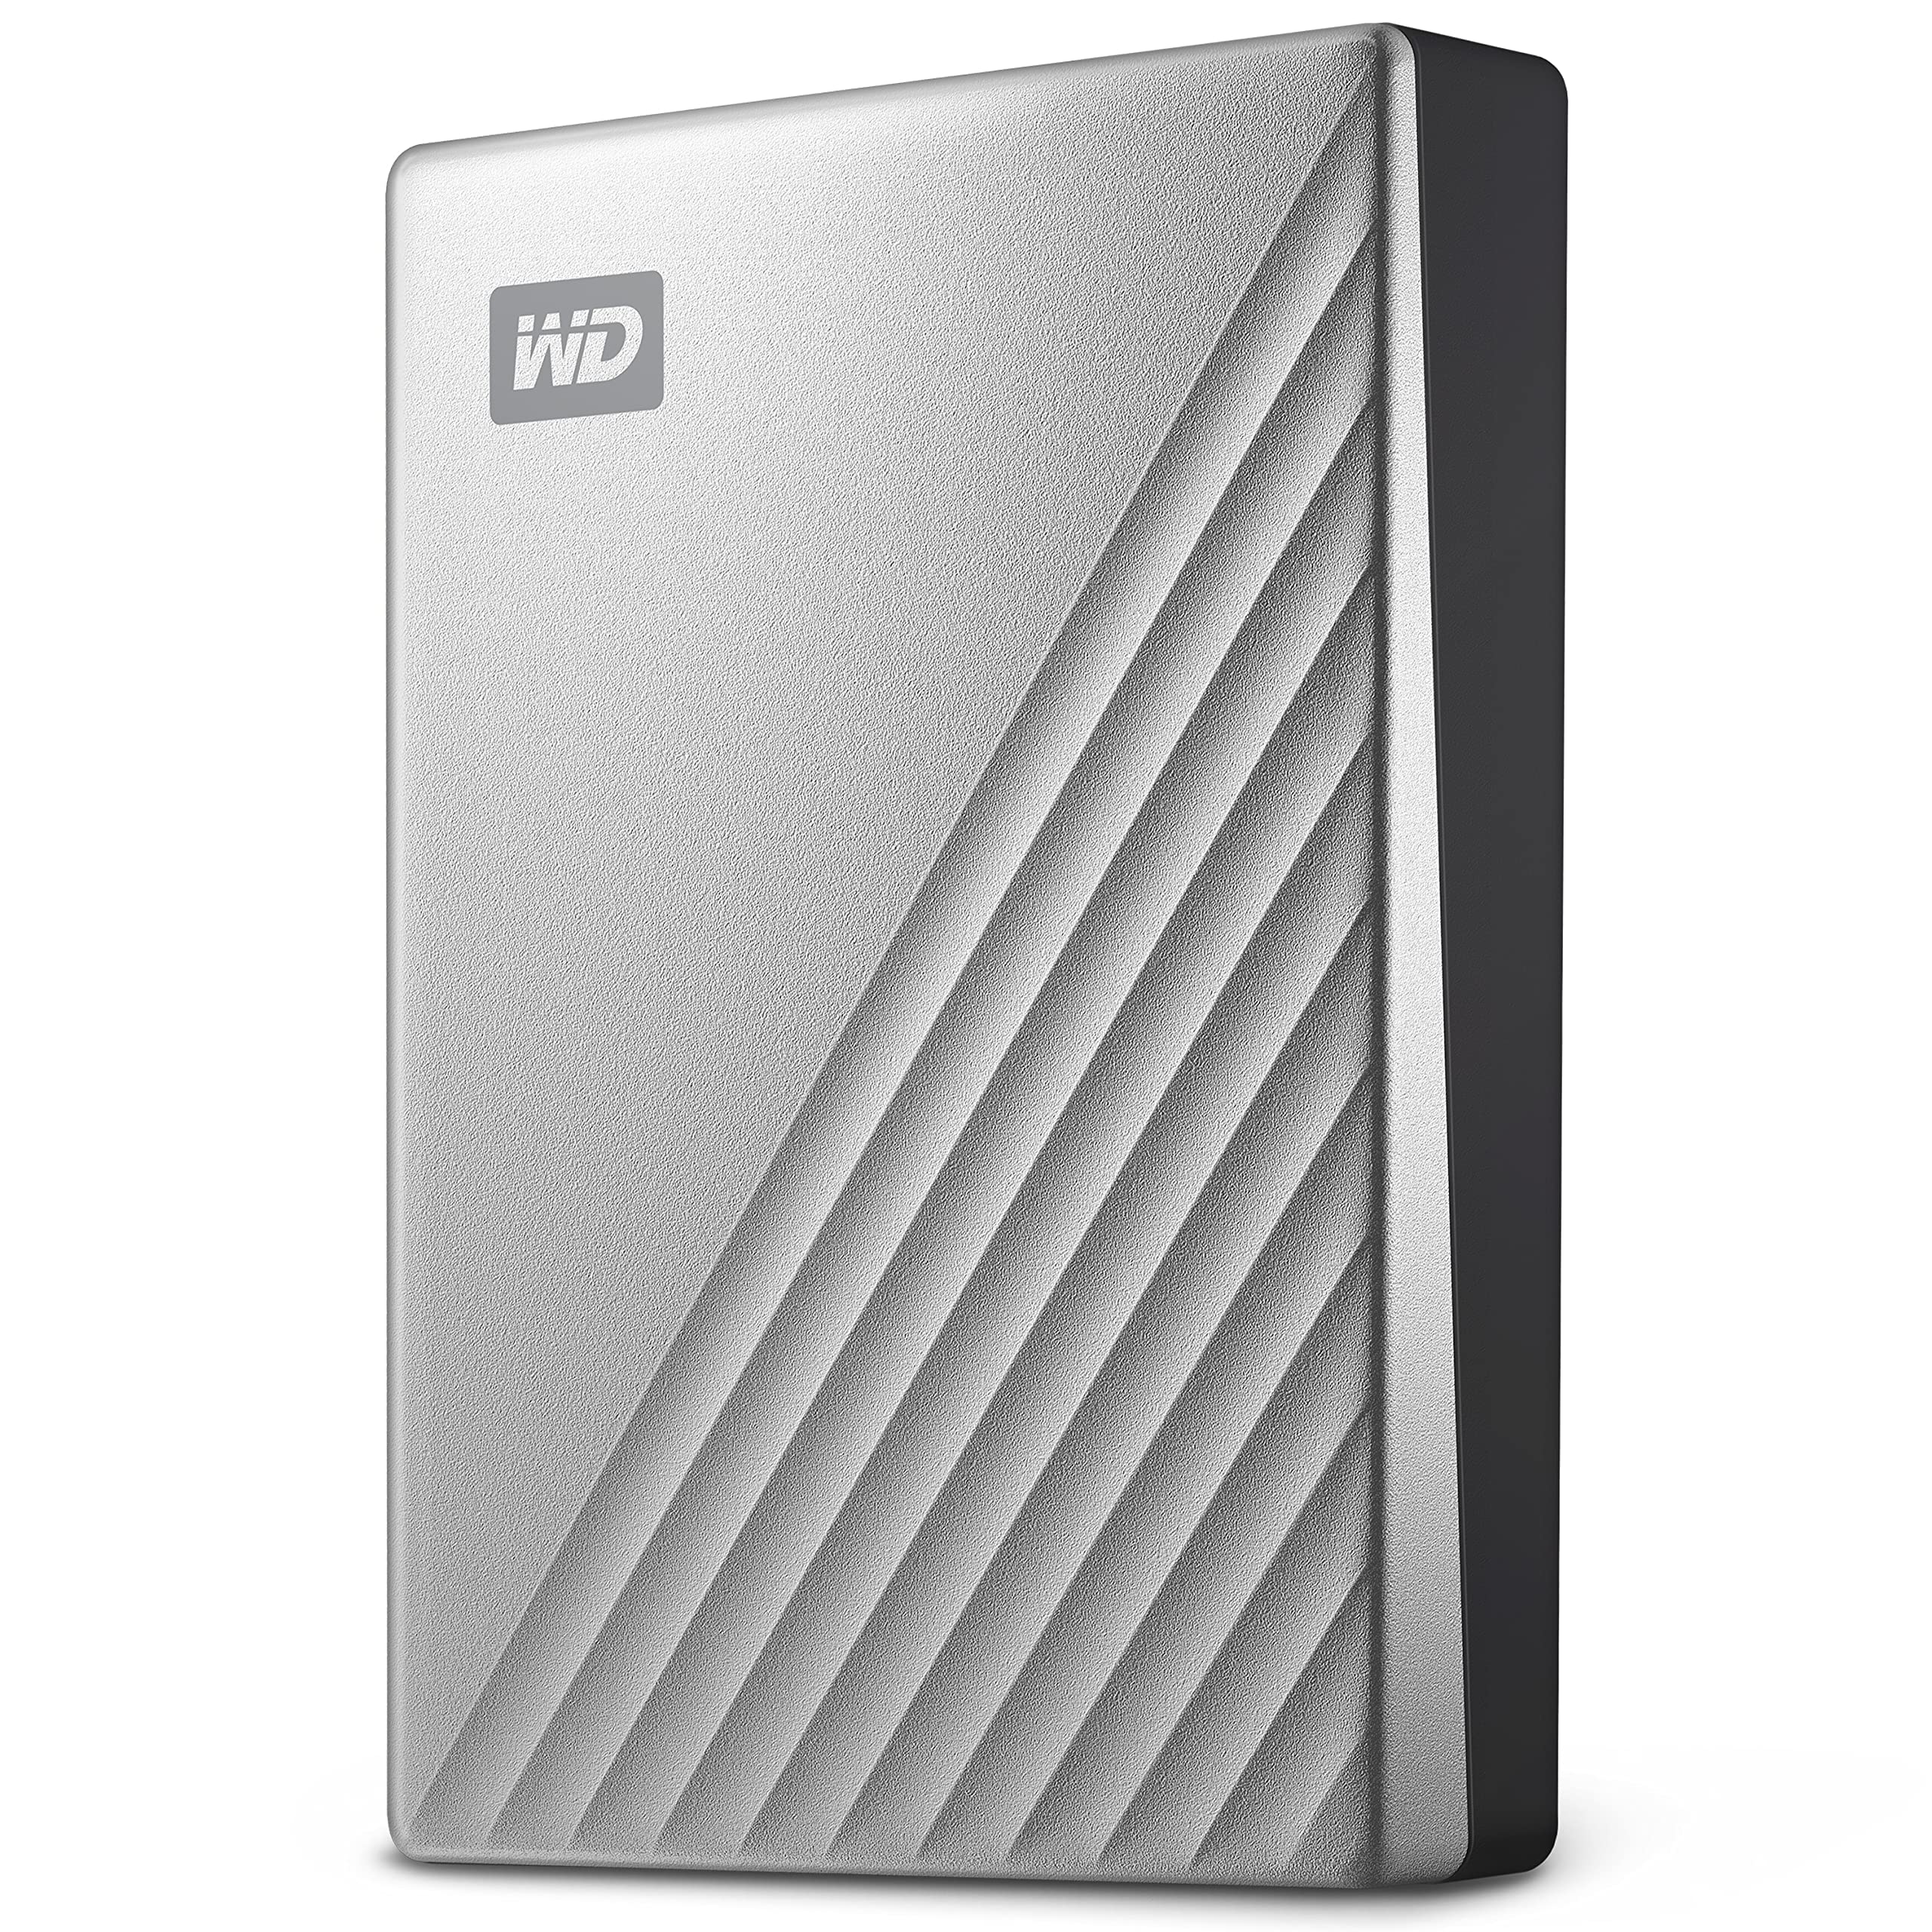 WD 1TB My Passport Ultra Silver Portable External Hard Drive HDD USB-C and USB 3.1 Compatible - WDBC3C0010BSL-WESN並行輸